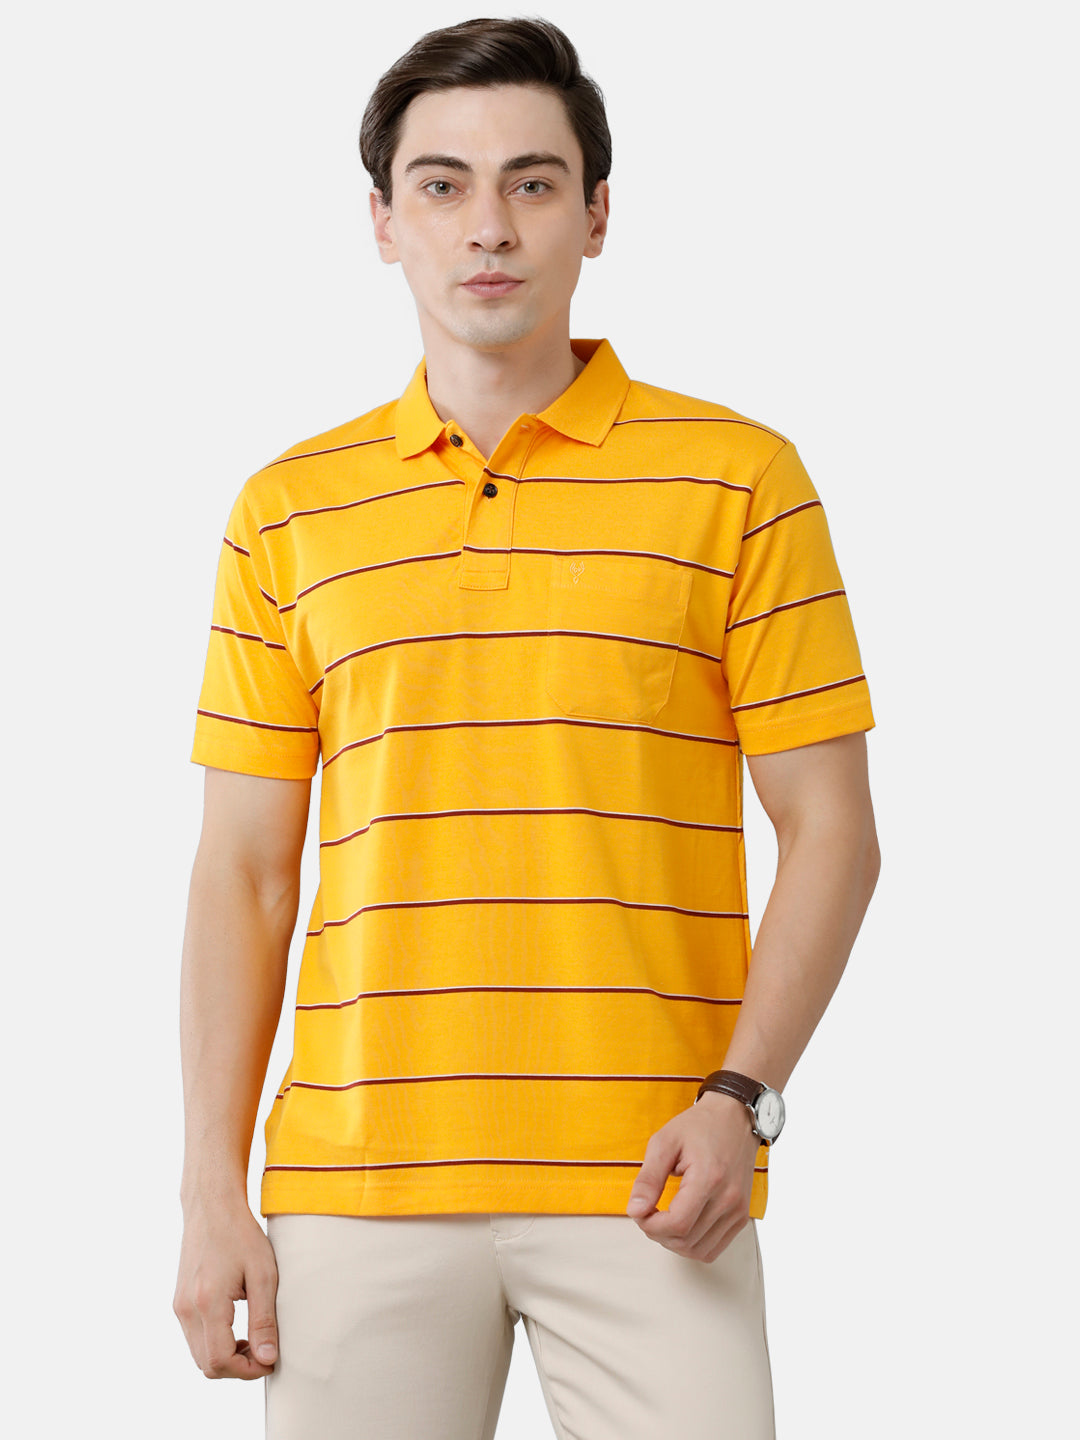 Classic Polo Mens Cotton Blend Striped Authentic Fit Polo Neck Yellow Color T-Shirt | Avon 506 A